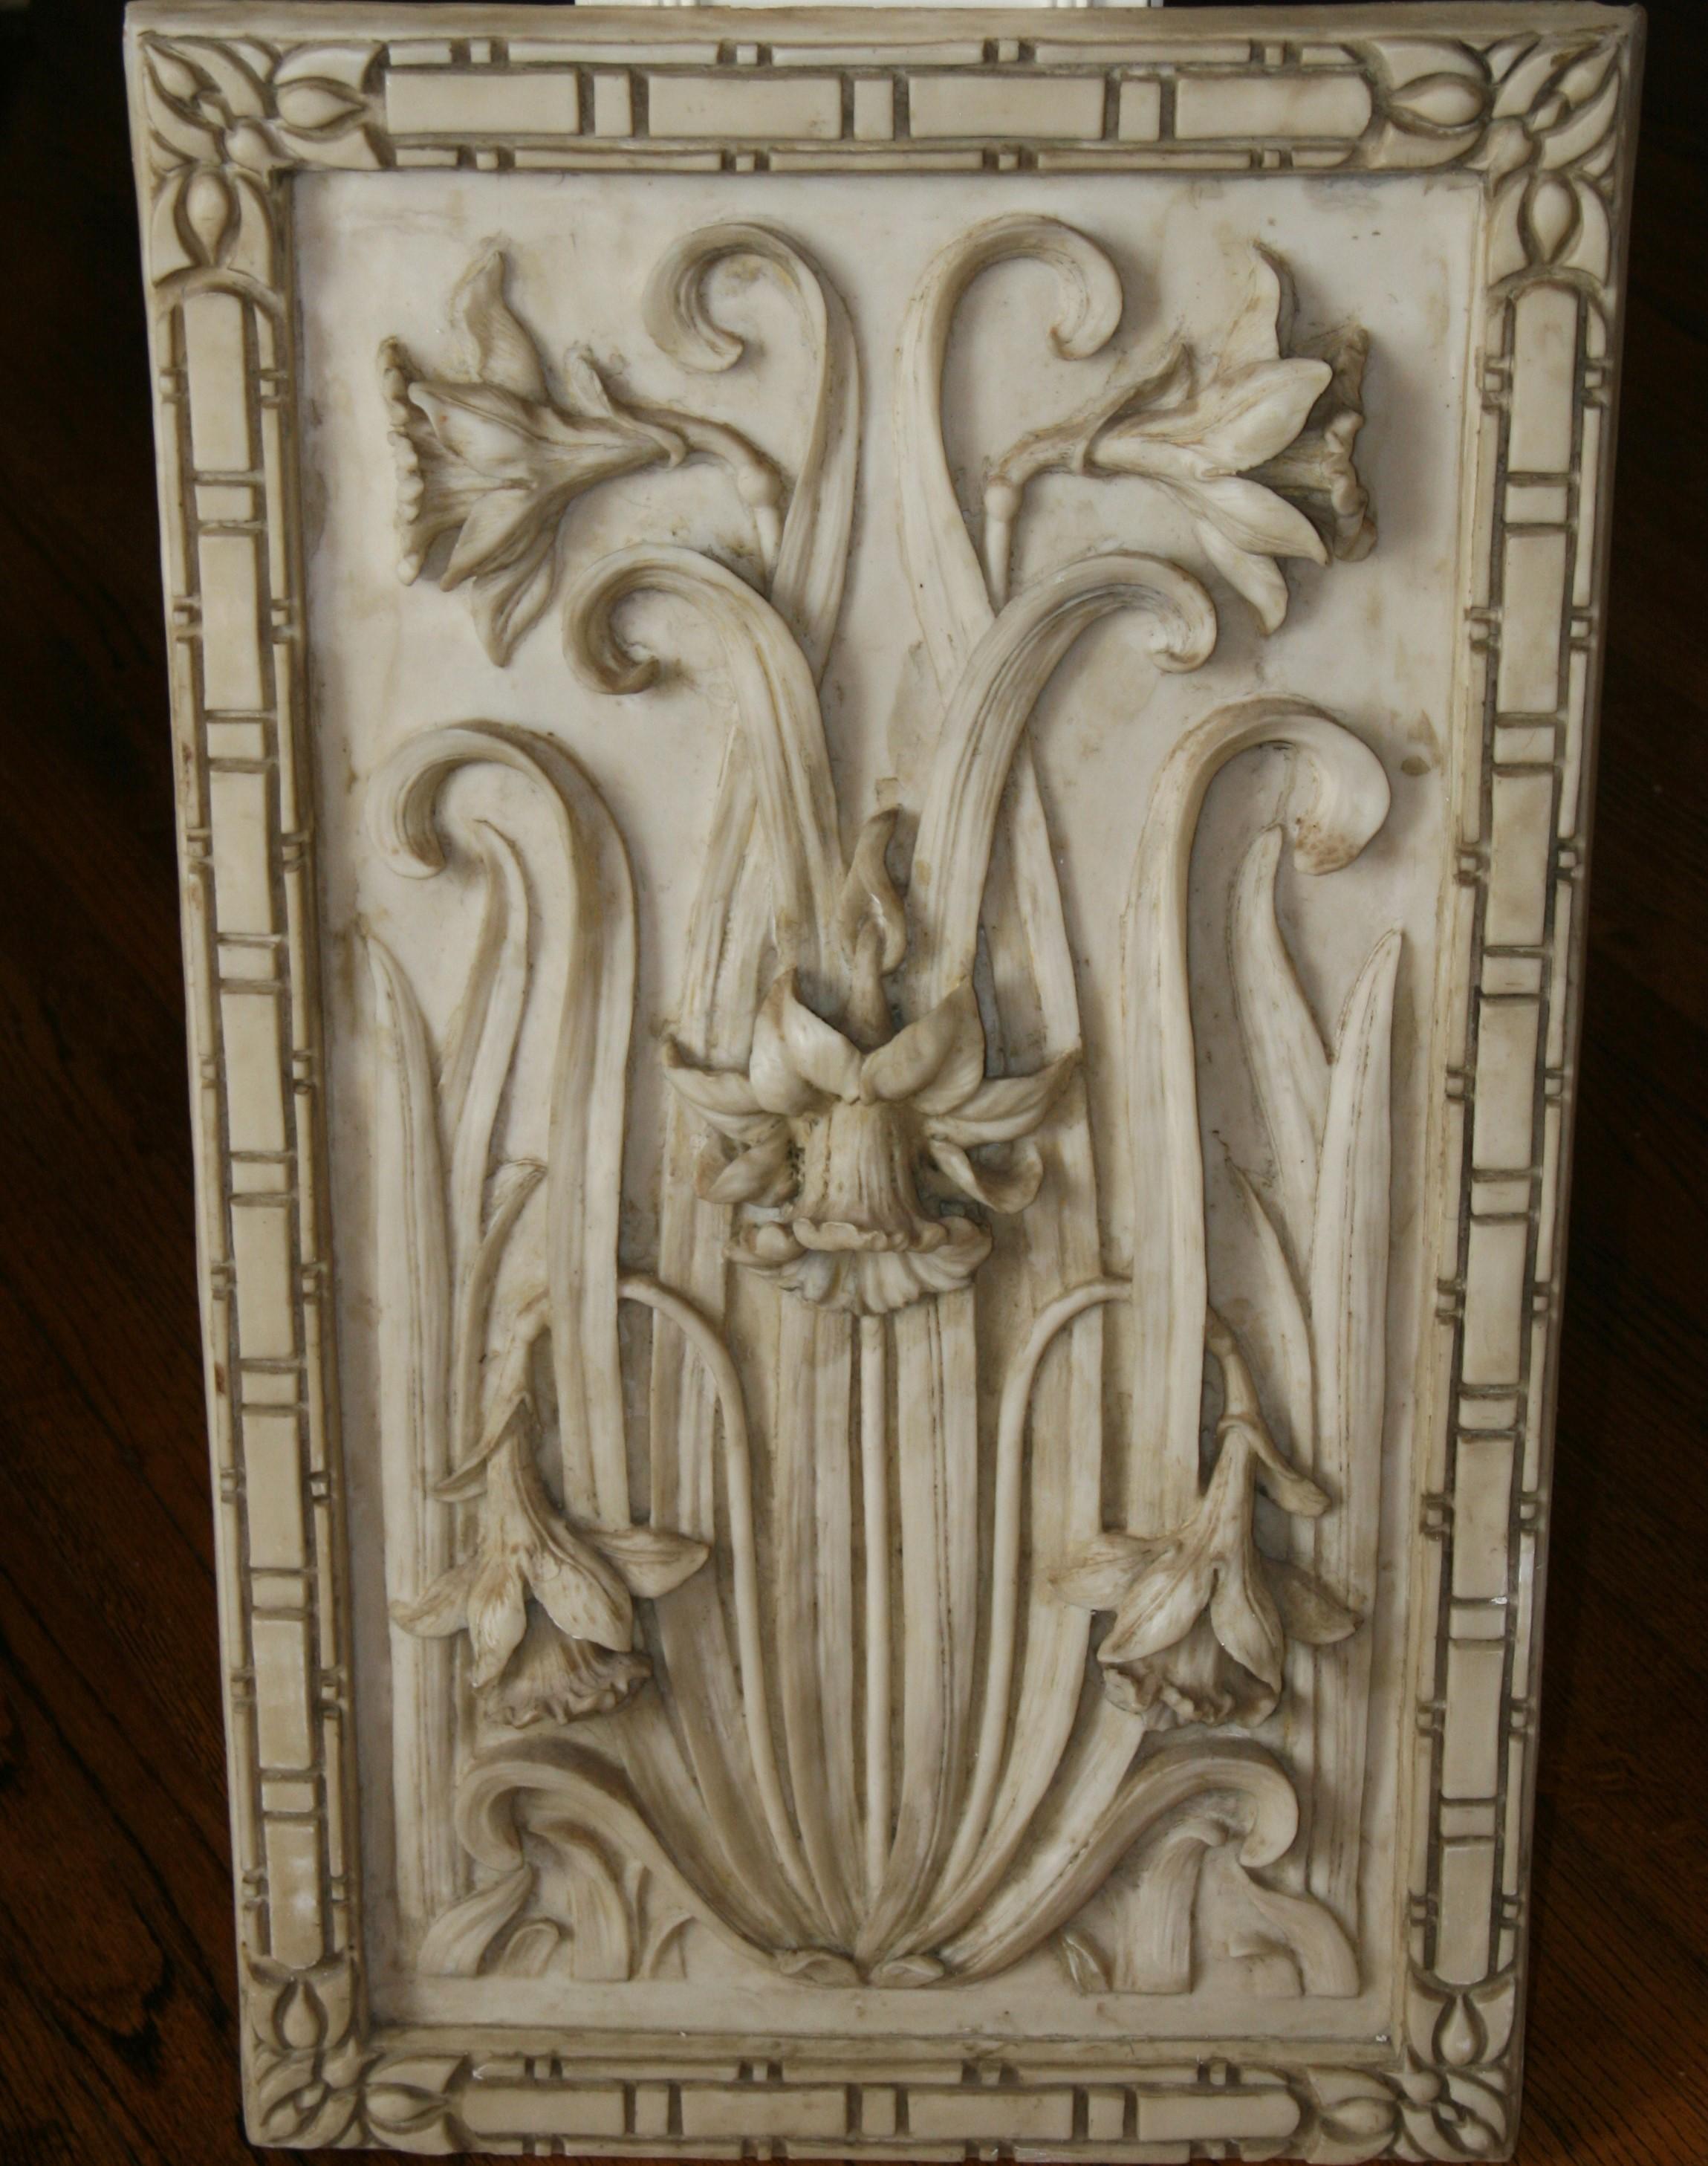 1412 Art Nouveau style sculptural Wall panel with 3D foliage and daffodils.